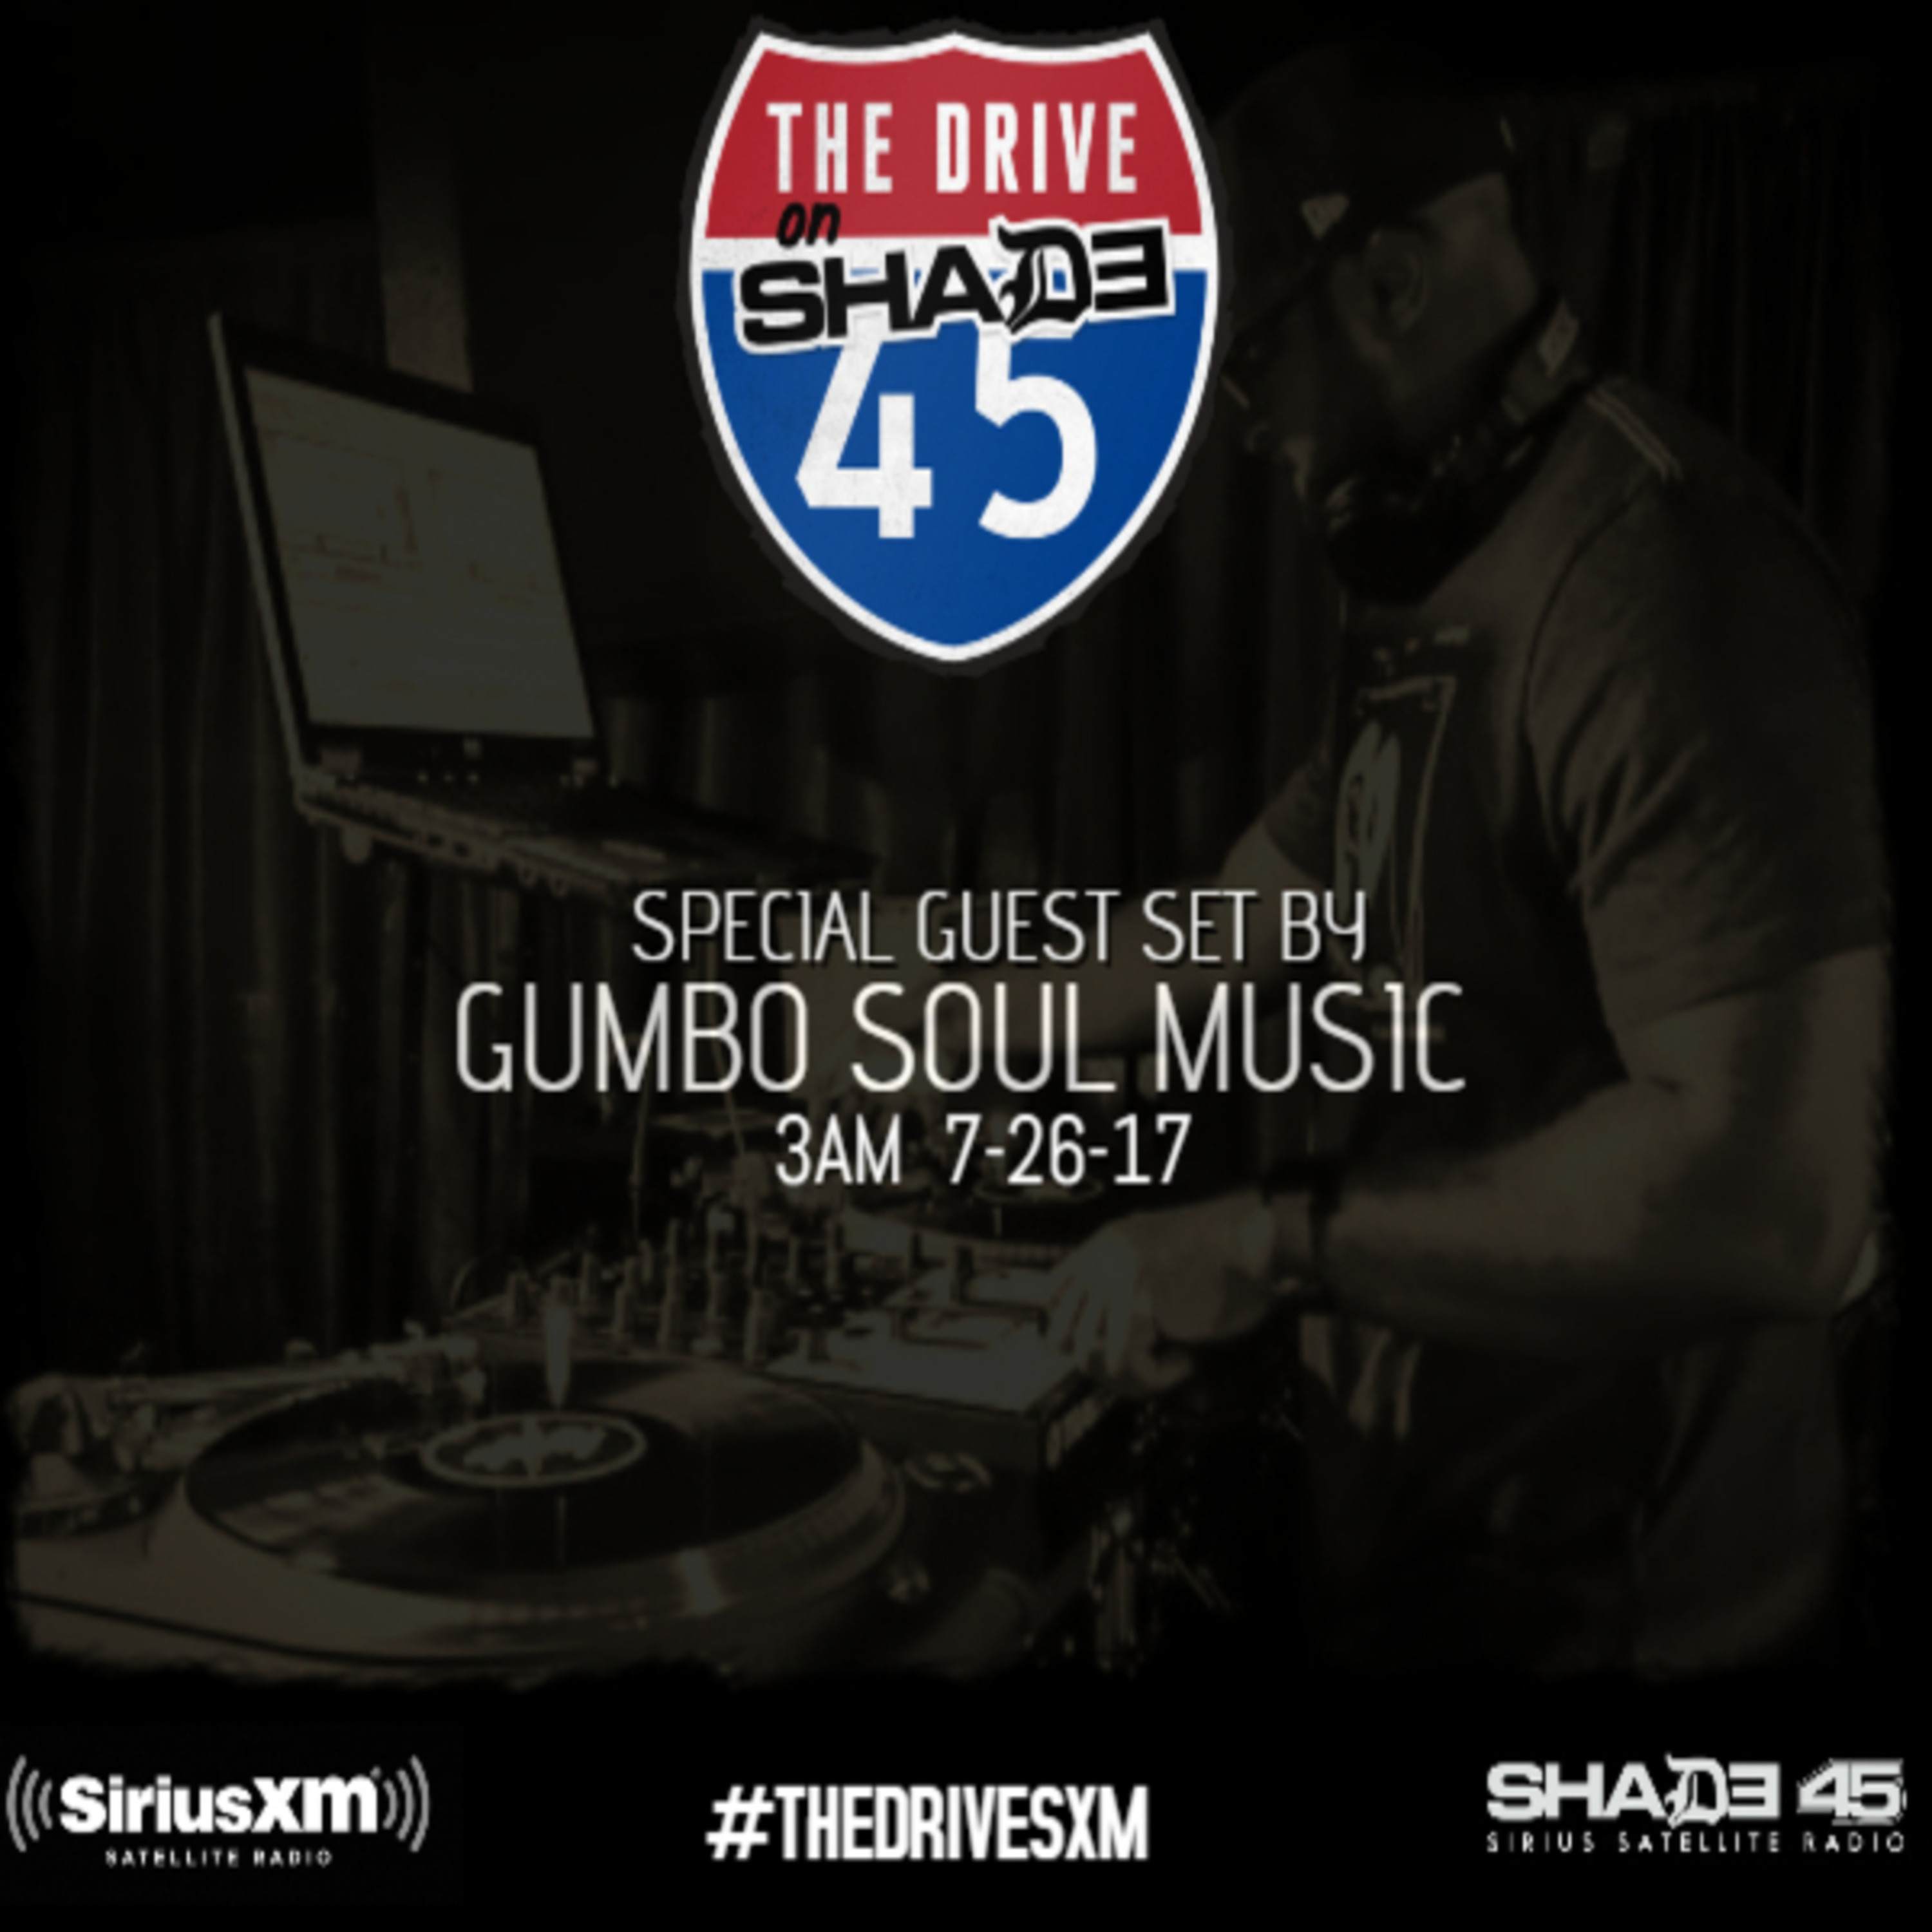 Black Podcasting - Guest Set on The Drive on Shade 45